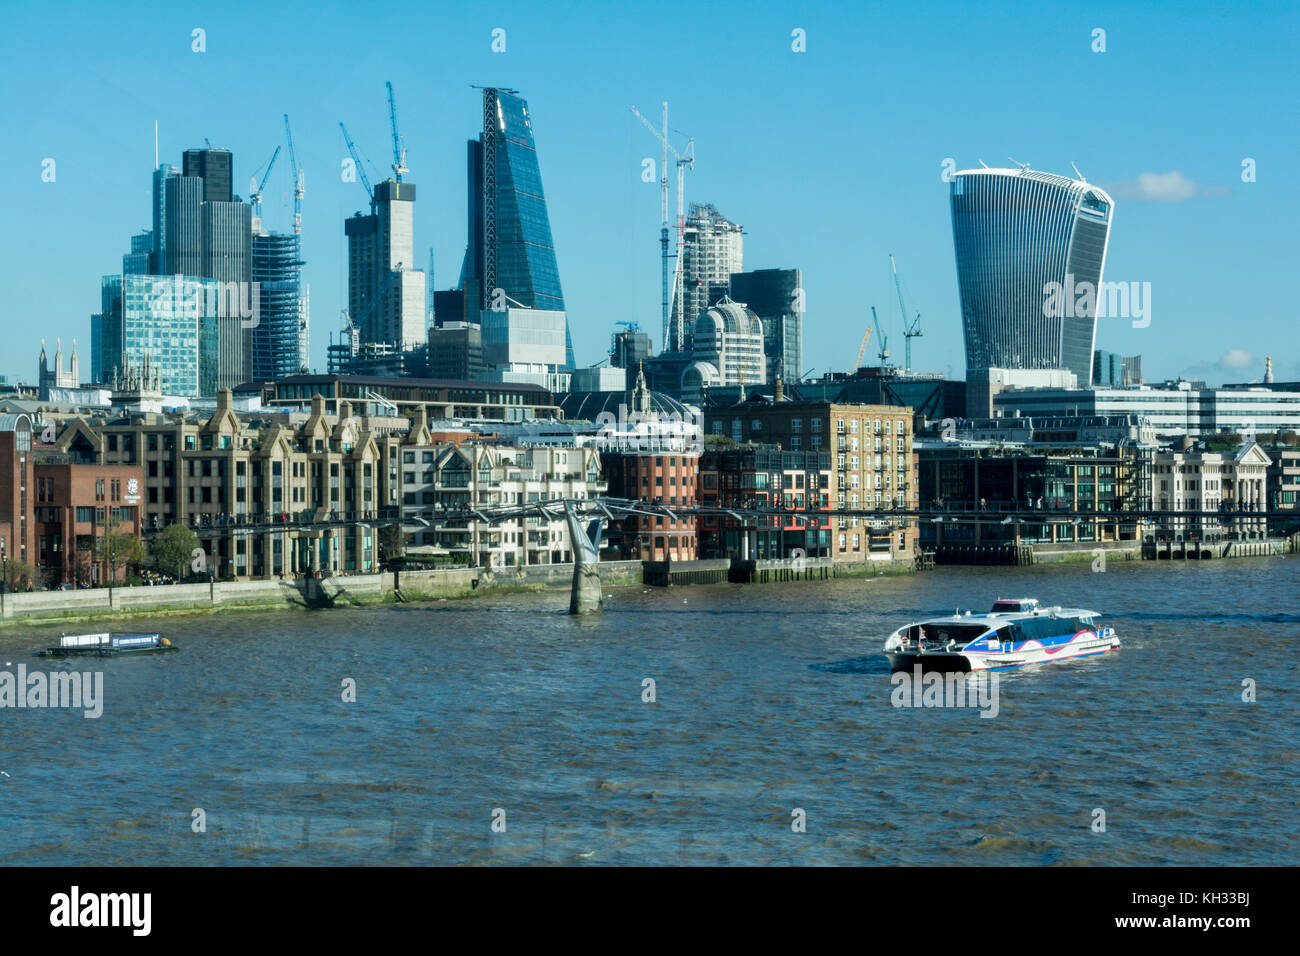 The City of London skyline as seen from Blackfriars Station, London, UK Stock Photo